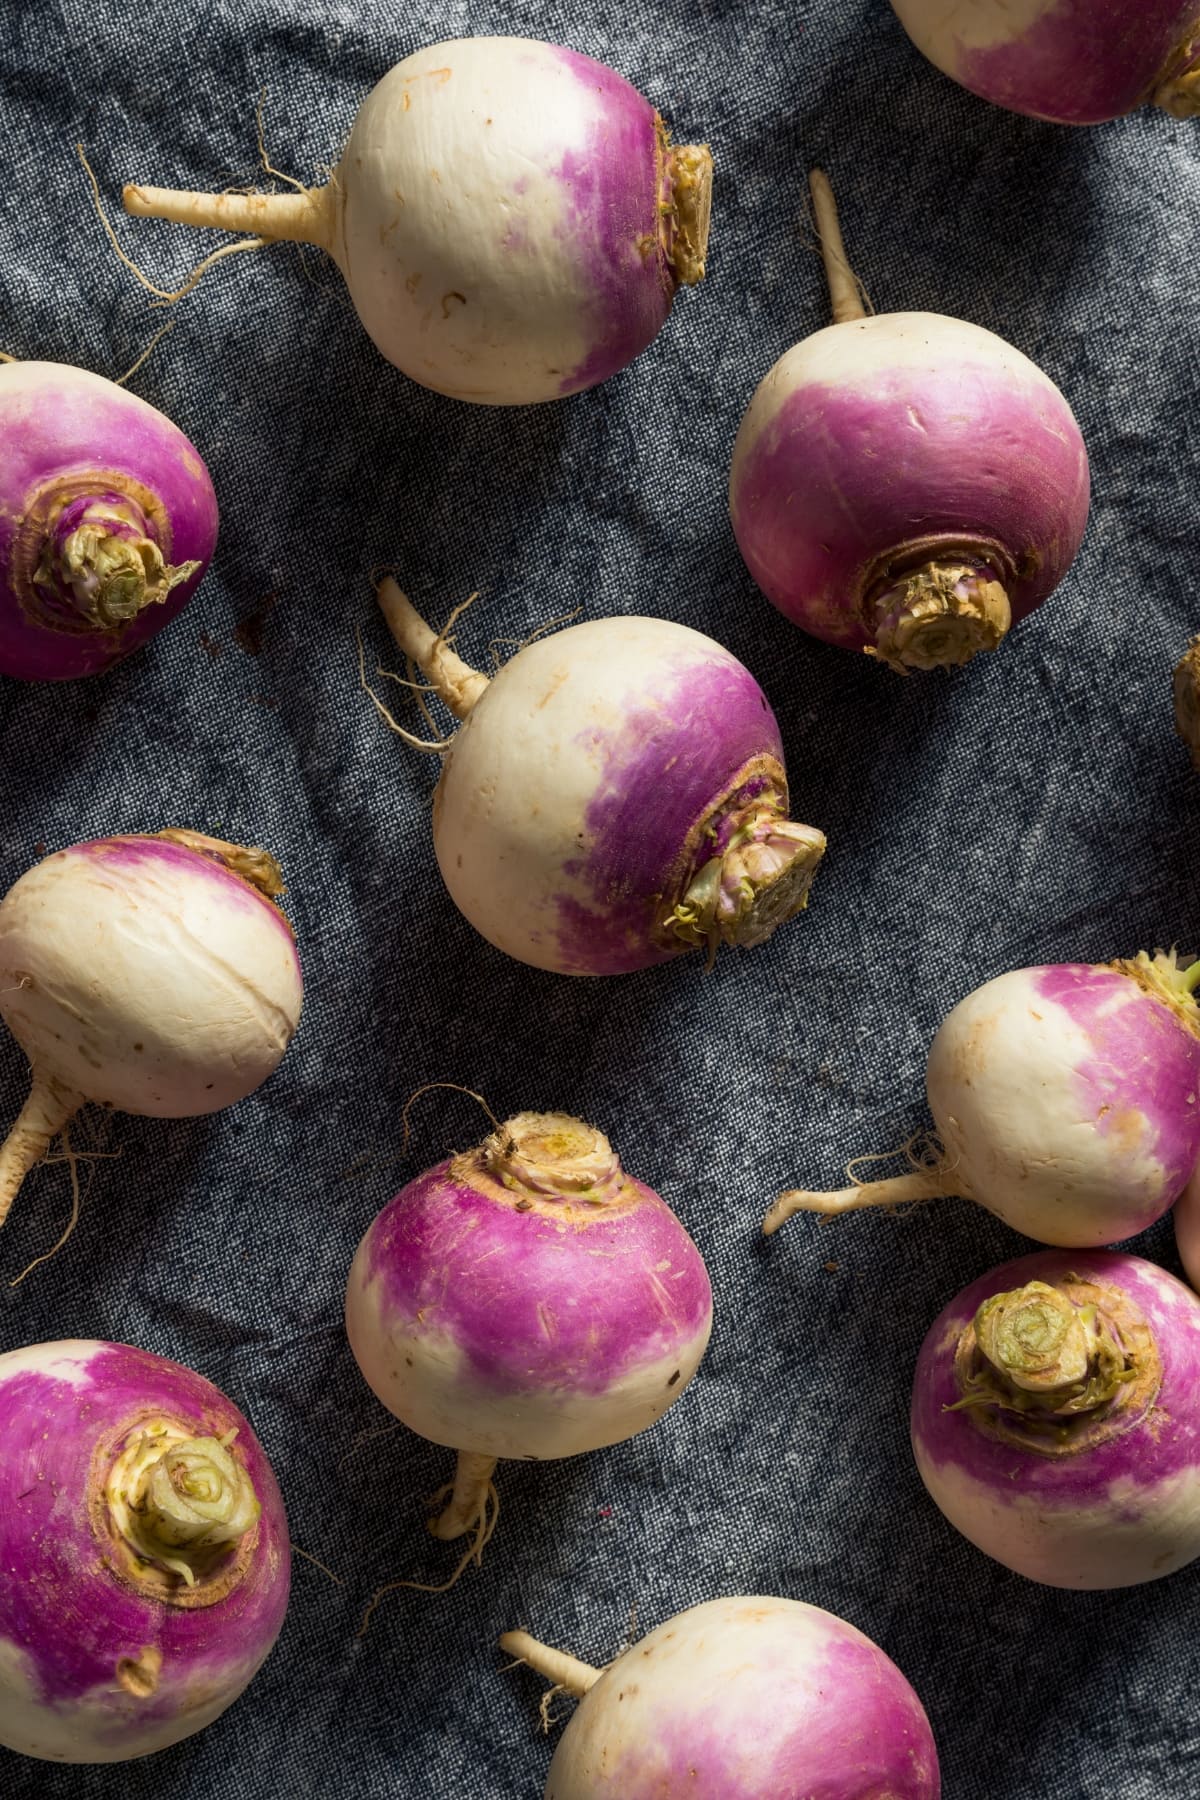 A group of organic purple turnips on a table